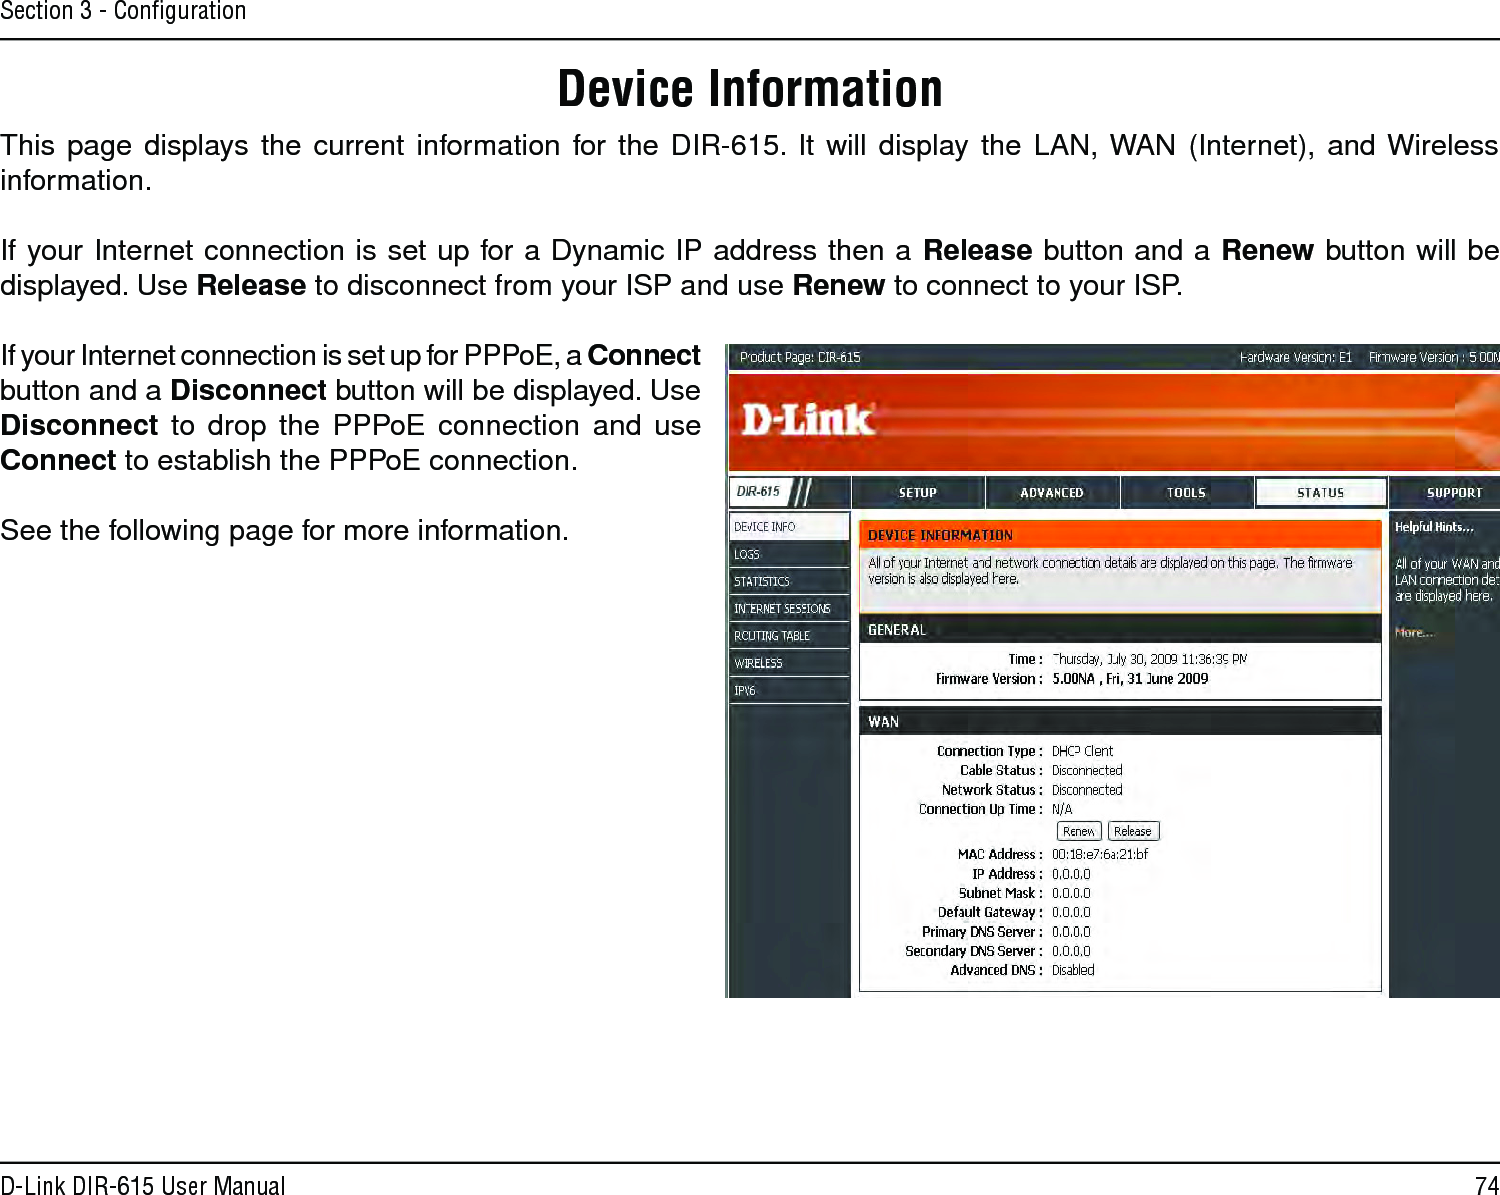 74D-Link DIR-615 User ManualSection 3 - ConﬁgurationThis page displays the current information for the DIR-615. It  will  display the LAN, WAN (Internet), and Wireless information.If your Internet connection is set up for a Dynamic IP address then a Release button and a Renew button will be displayed. Use Release to disconnect from your ISP and use Renew to connect to your ISP. If your Internet connection is set up for PPPoE, a Connect button and a Disconnect button will be displayed. Use Disconnect to  drop  the  PPPoE connection and use Connect to establish the PPPoE connection.See the following page for more information.Device Information